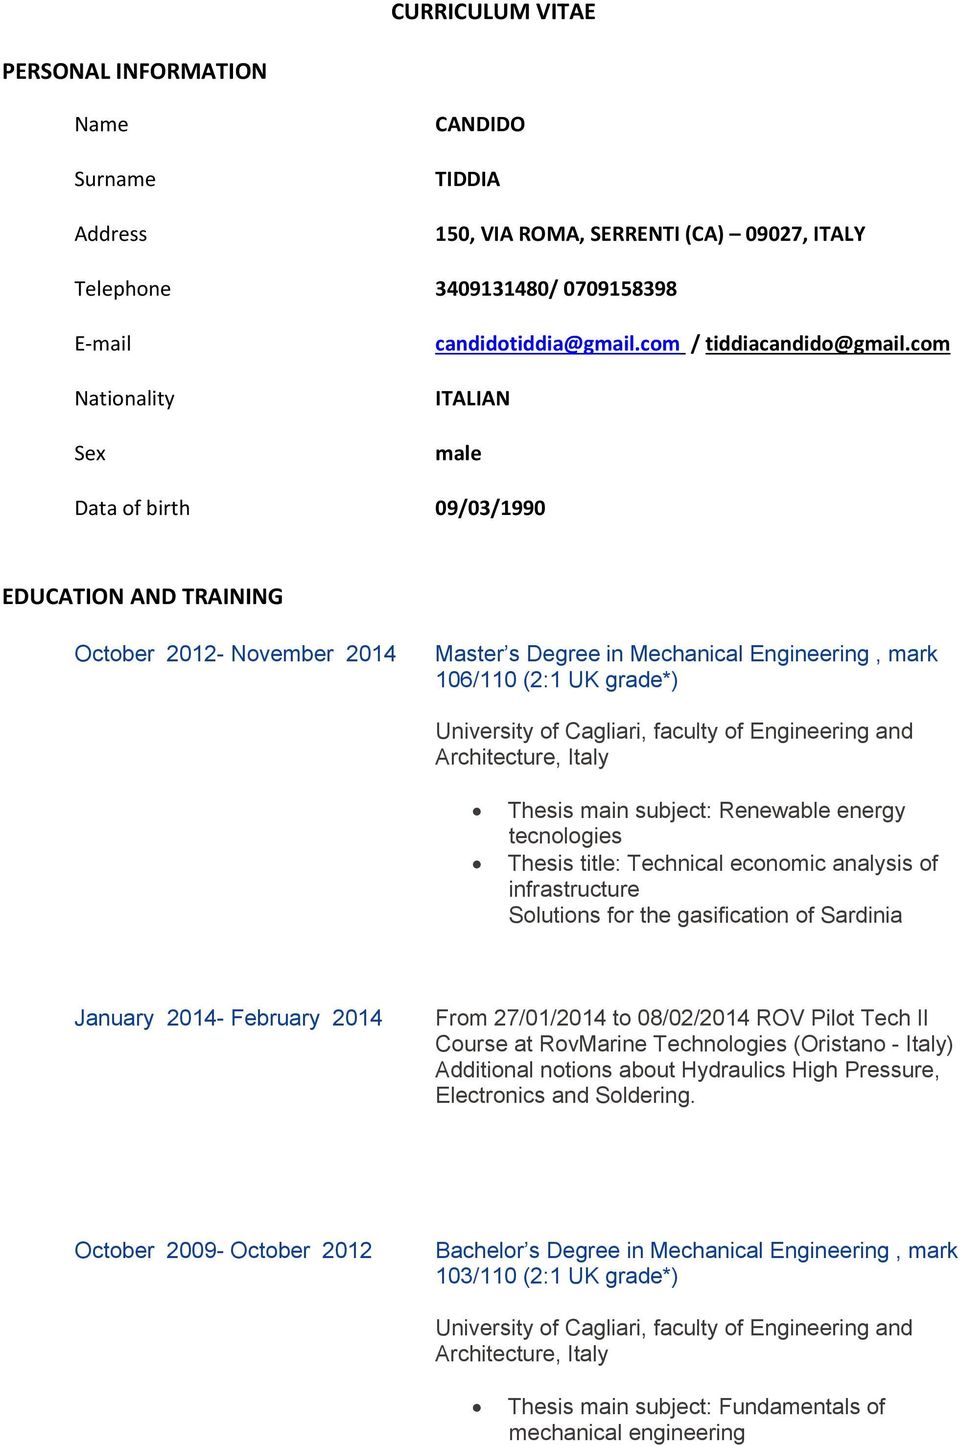 com ITALIAN male Data of birth 09/03/1990 EDUCATION AND TRAINING October 2012- November 2014 Master s Degree in Mechanical Engineering, mark 106/110 (2:1 UK grade*) University of Cagliari, faculty of